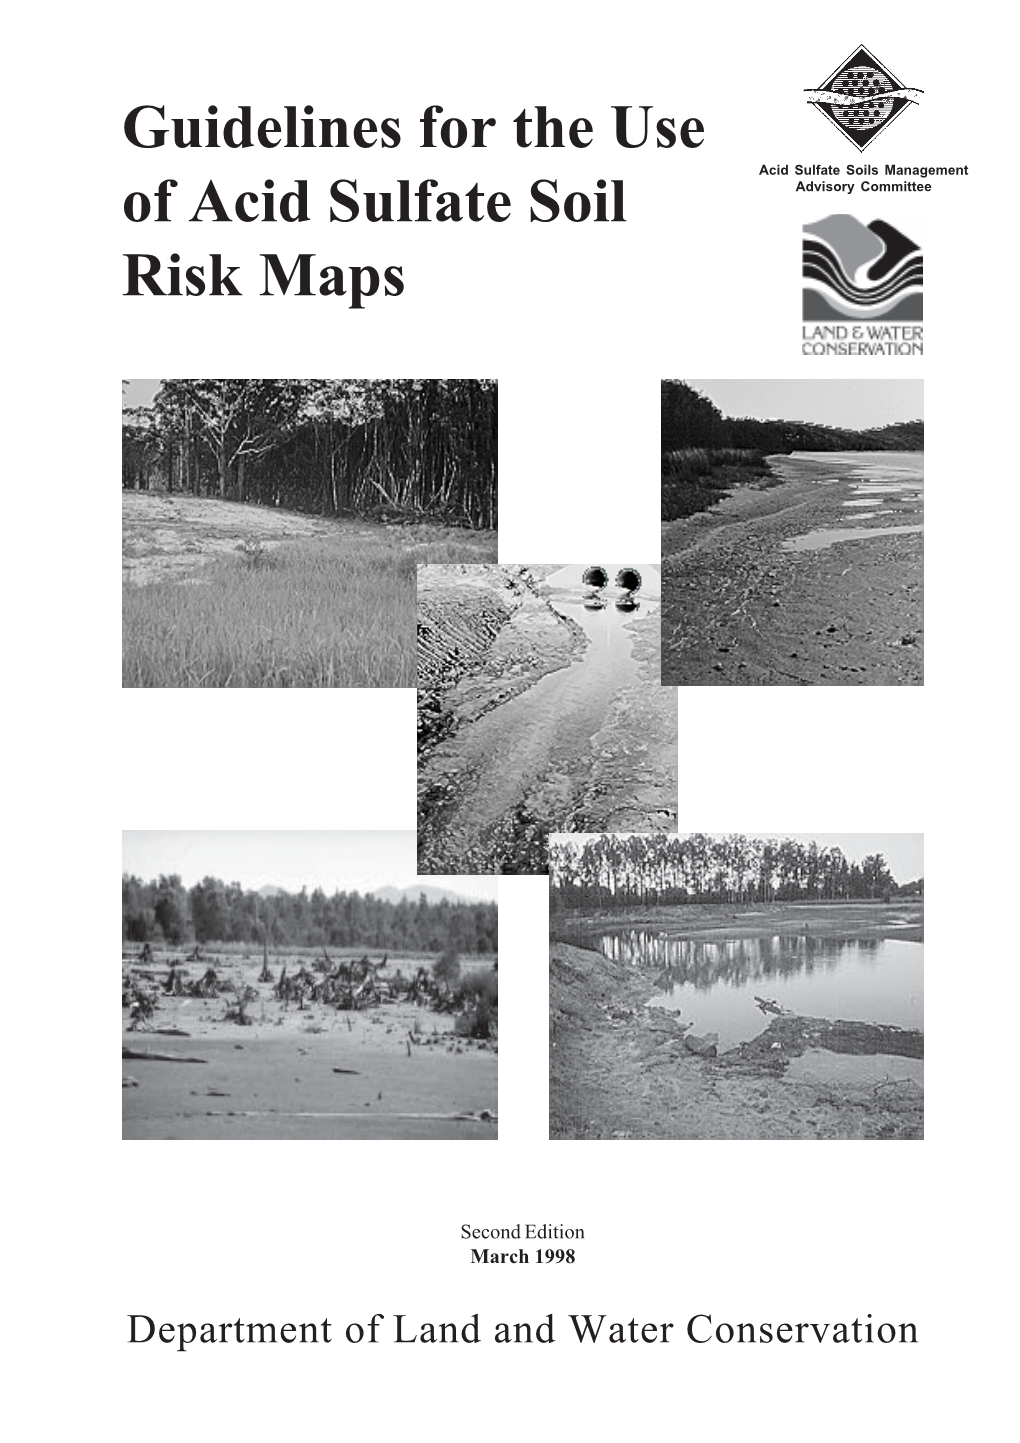 Guidelines for the Use of Acid Sulfate Soil Risk Maps, 2Nd Ed., Department of Land and Water Conservation, Sydney